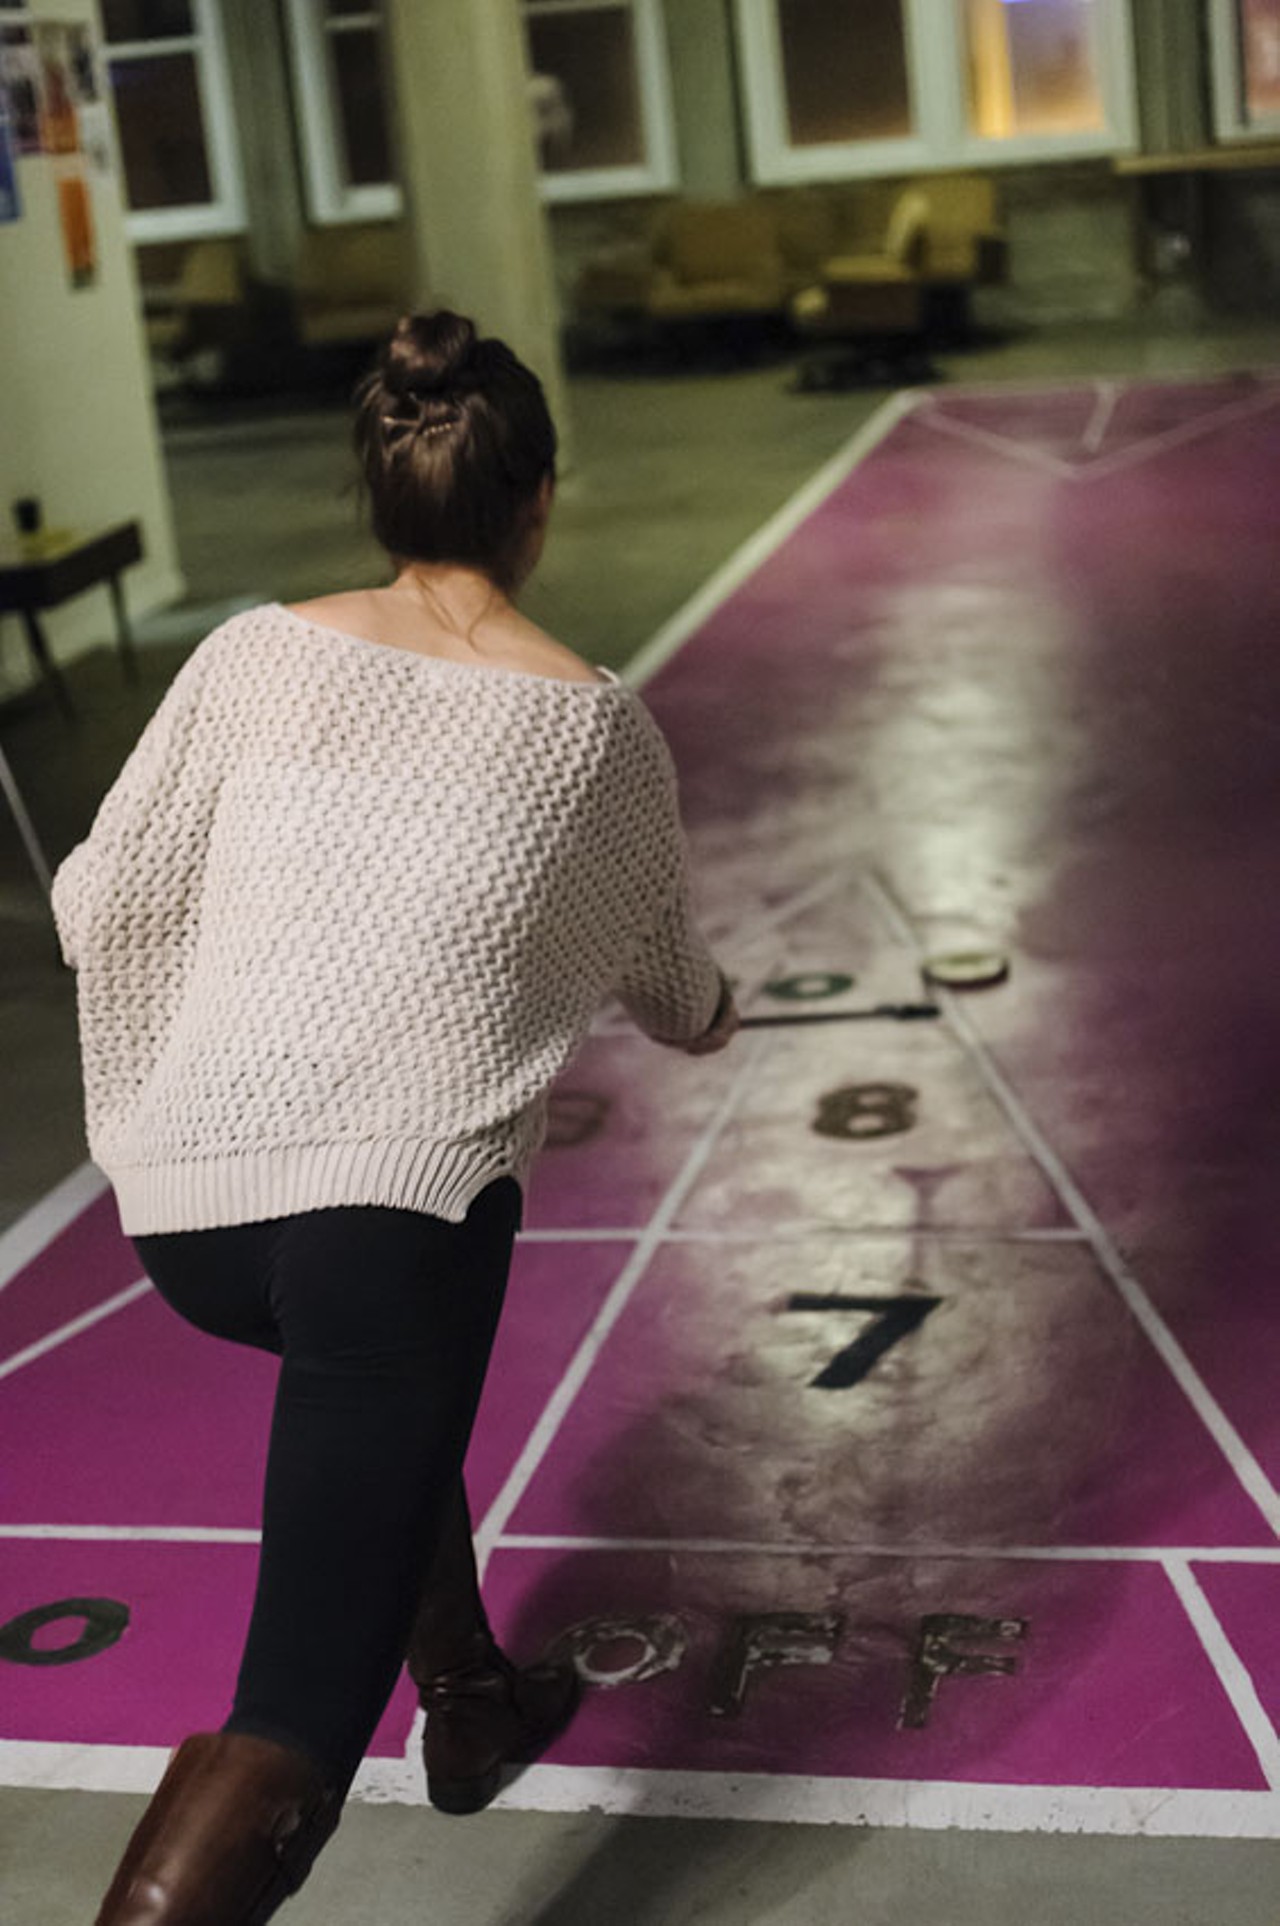 Even while concerts were going on in the next room, some fans found time to play a game of shuffleboard.